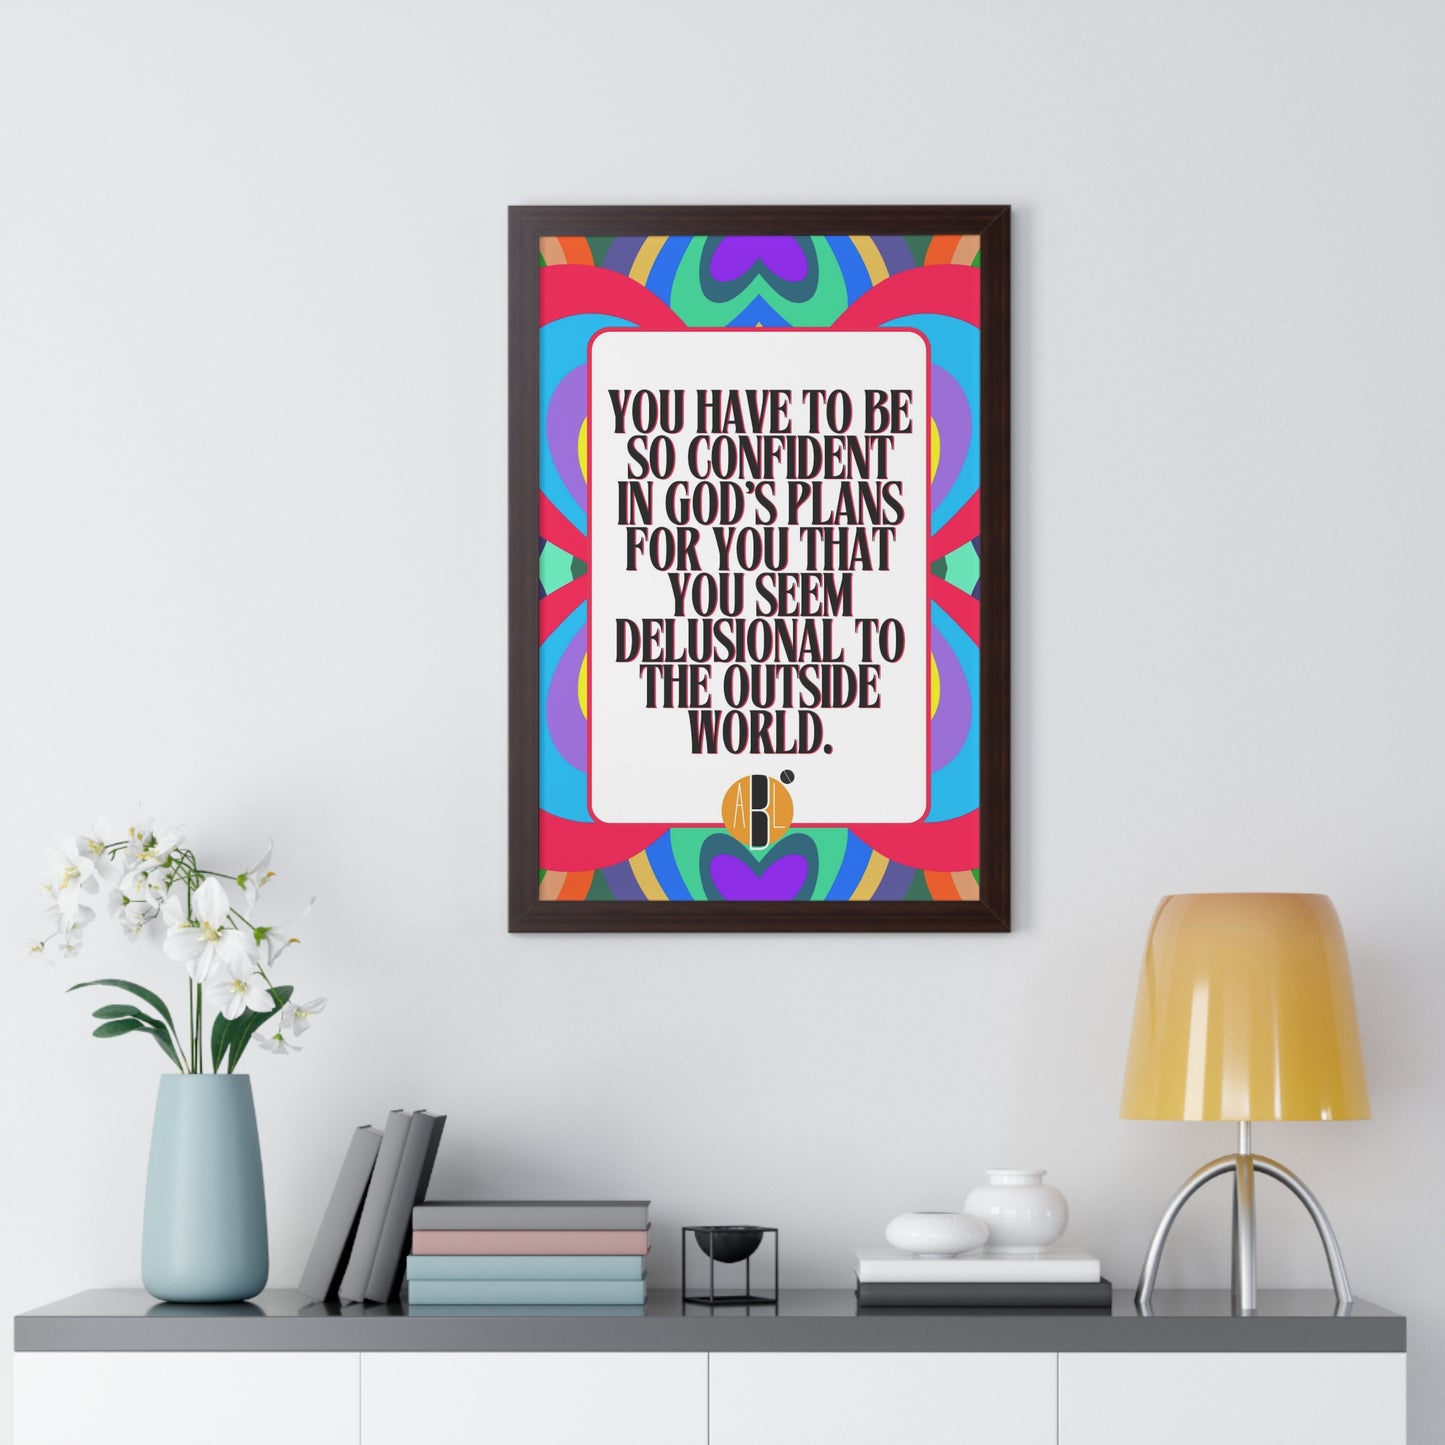 ABL Inspirational Framed Vertical Poster: " You have to..."